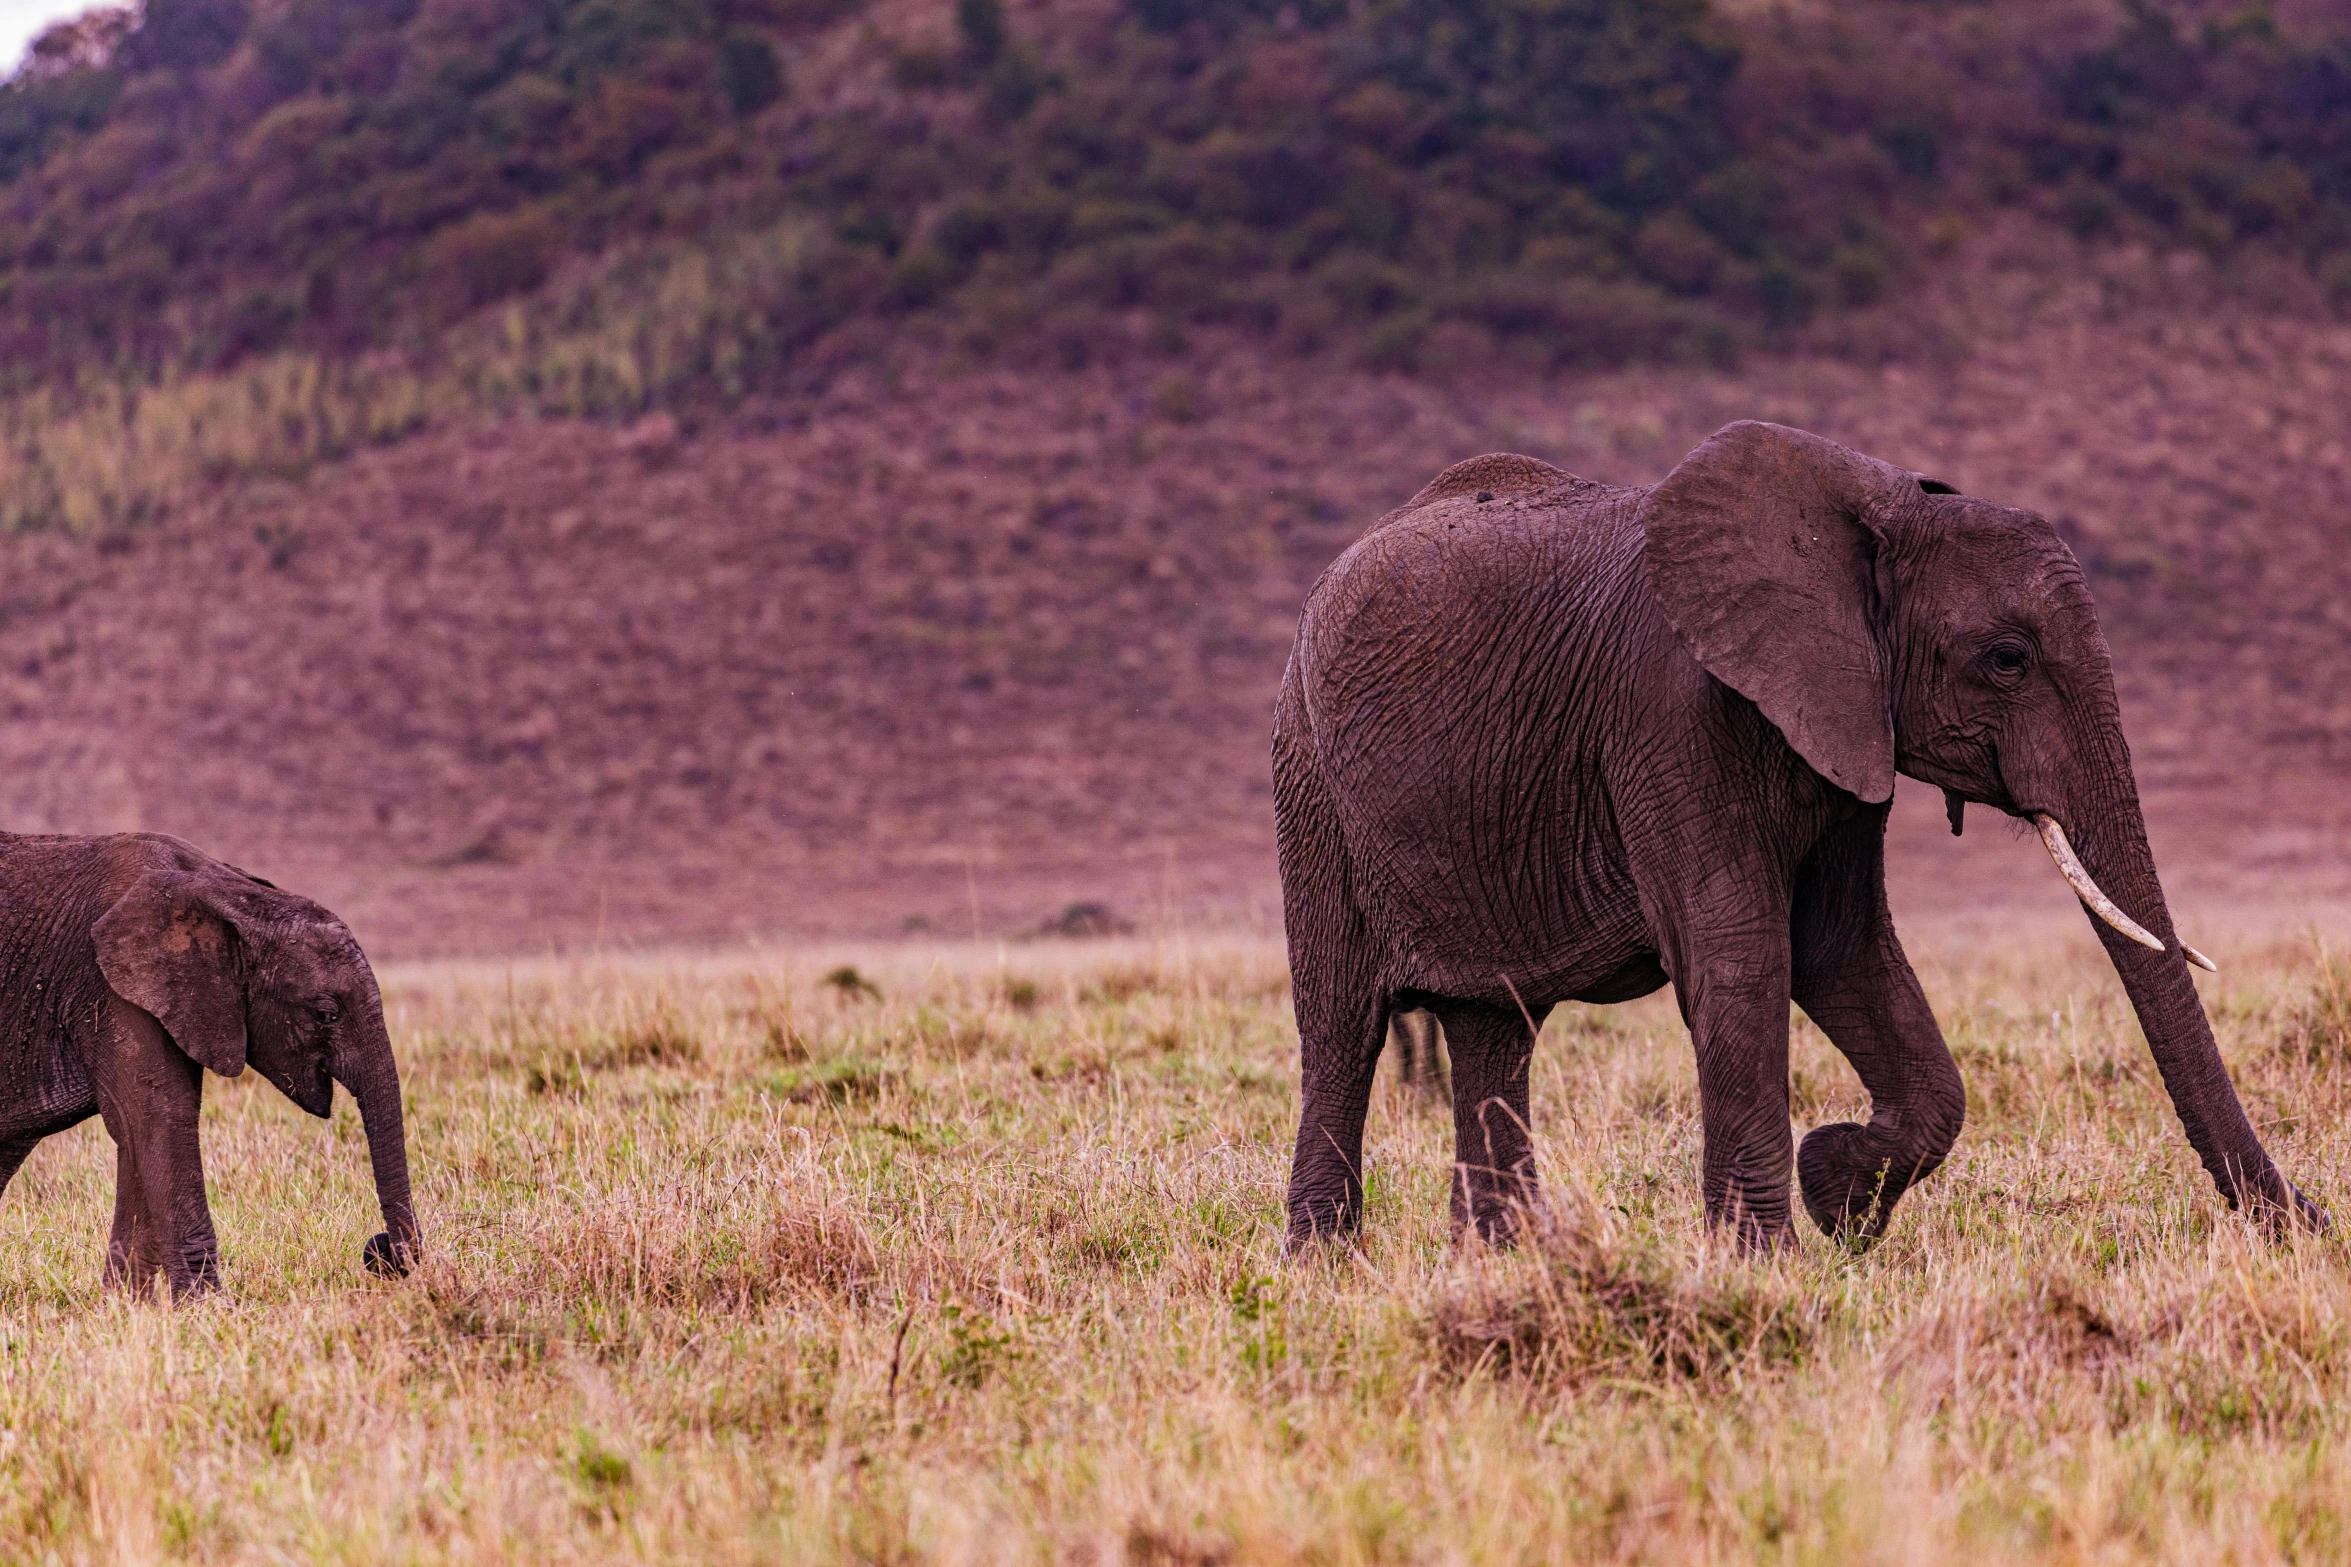 an adult and baby elephant walking through a grassy area